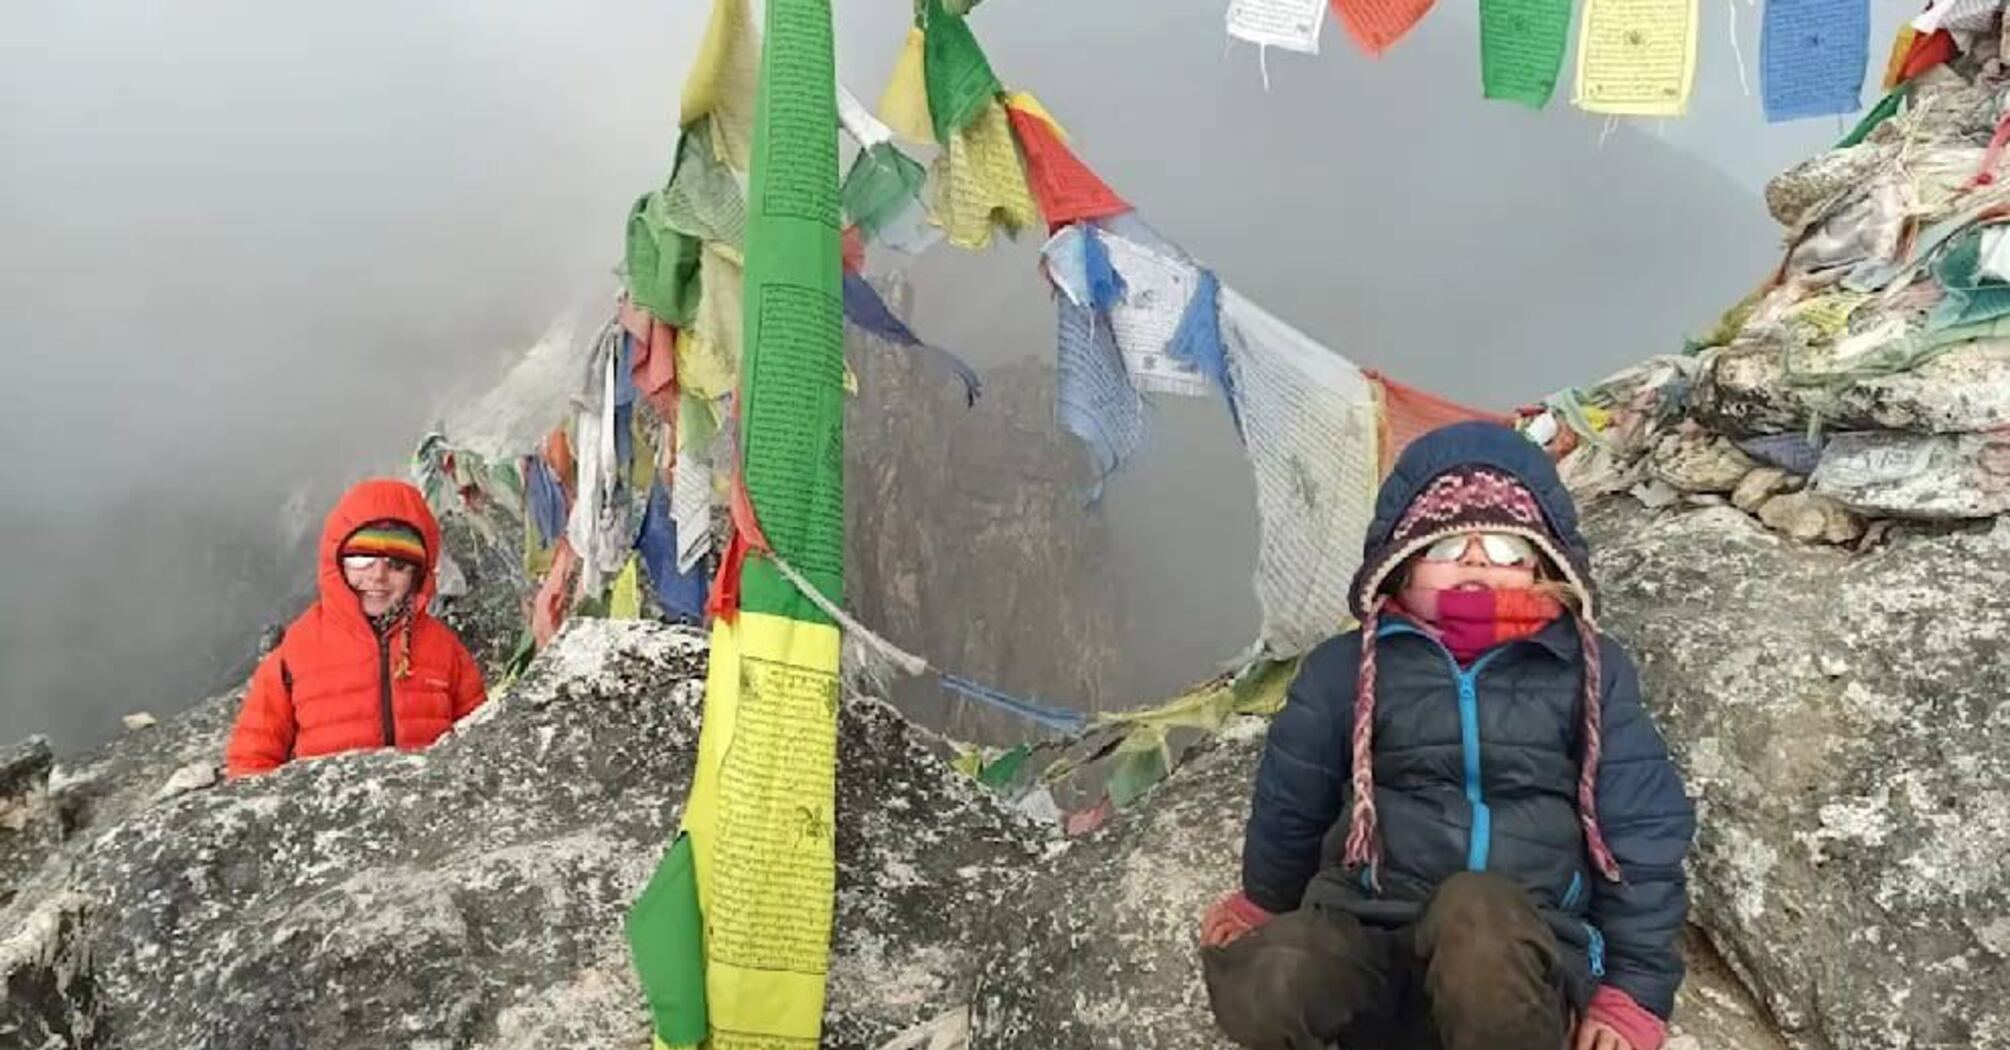 A four-year-old girl from the Czech Republic set a record by conquering Everest Base Camp